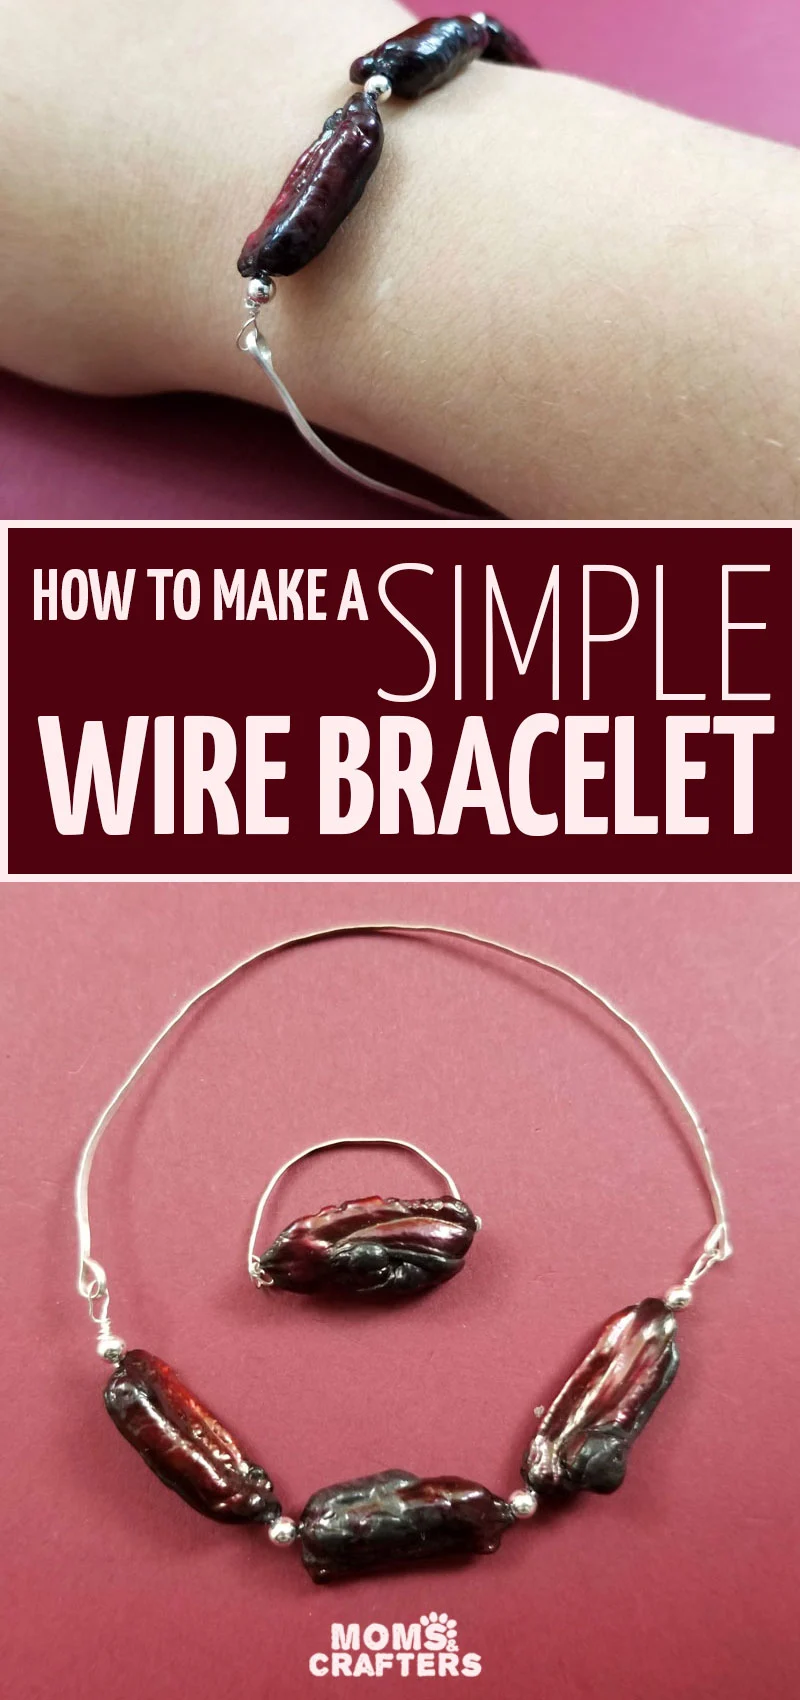 Click for a super simple and elegant wire bracelet DIY tutorial! This easy wire wrapped bangle bracelet is fun for stackign or wearing alone and is a cool jewelry making project for beginners. 